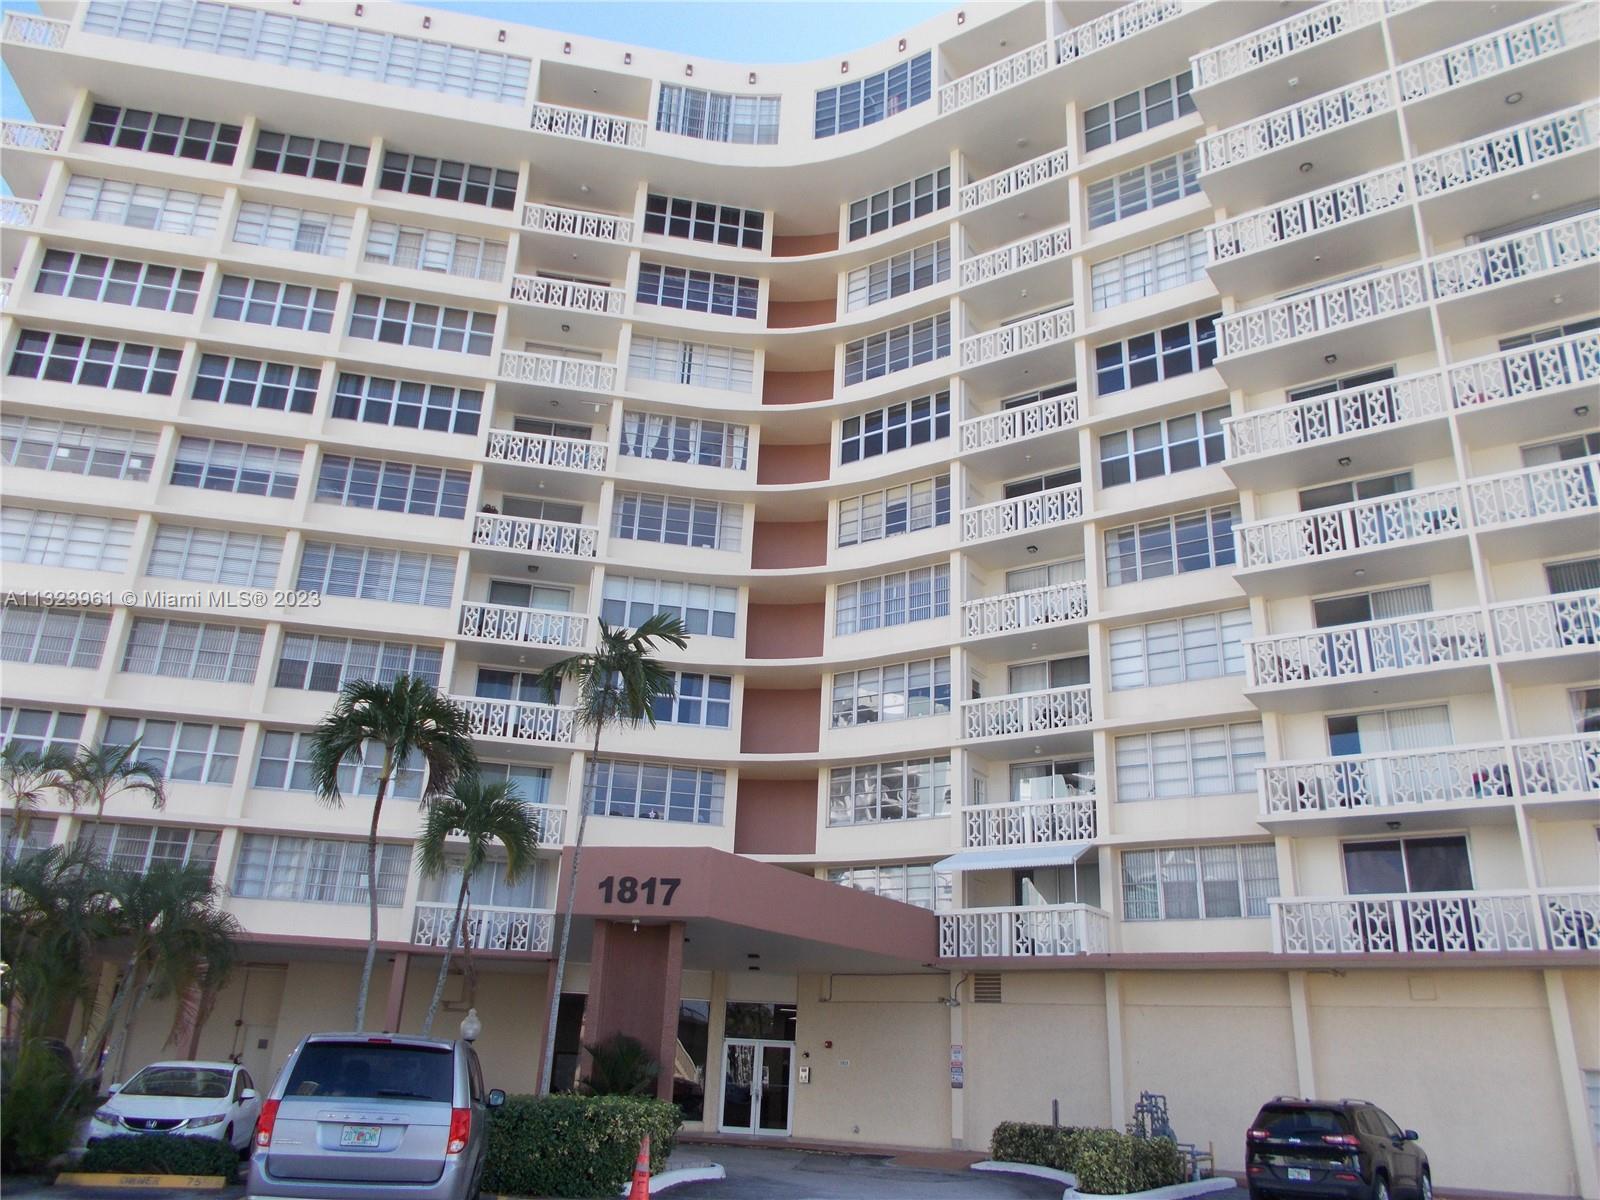 EXCELLENT LOCATION ACROSS FROM THE BEACH,CLOSE TO HOLLYWOOD BEACH,DIPLOMAT MALL AND 
RESTAURANTS.
